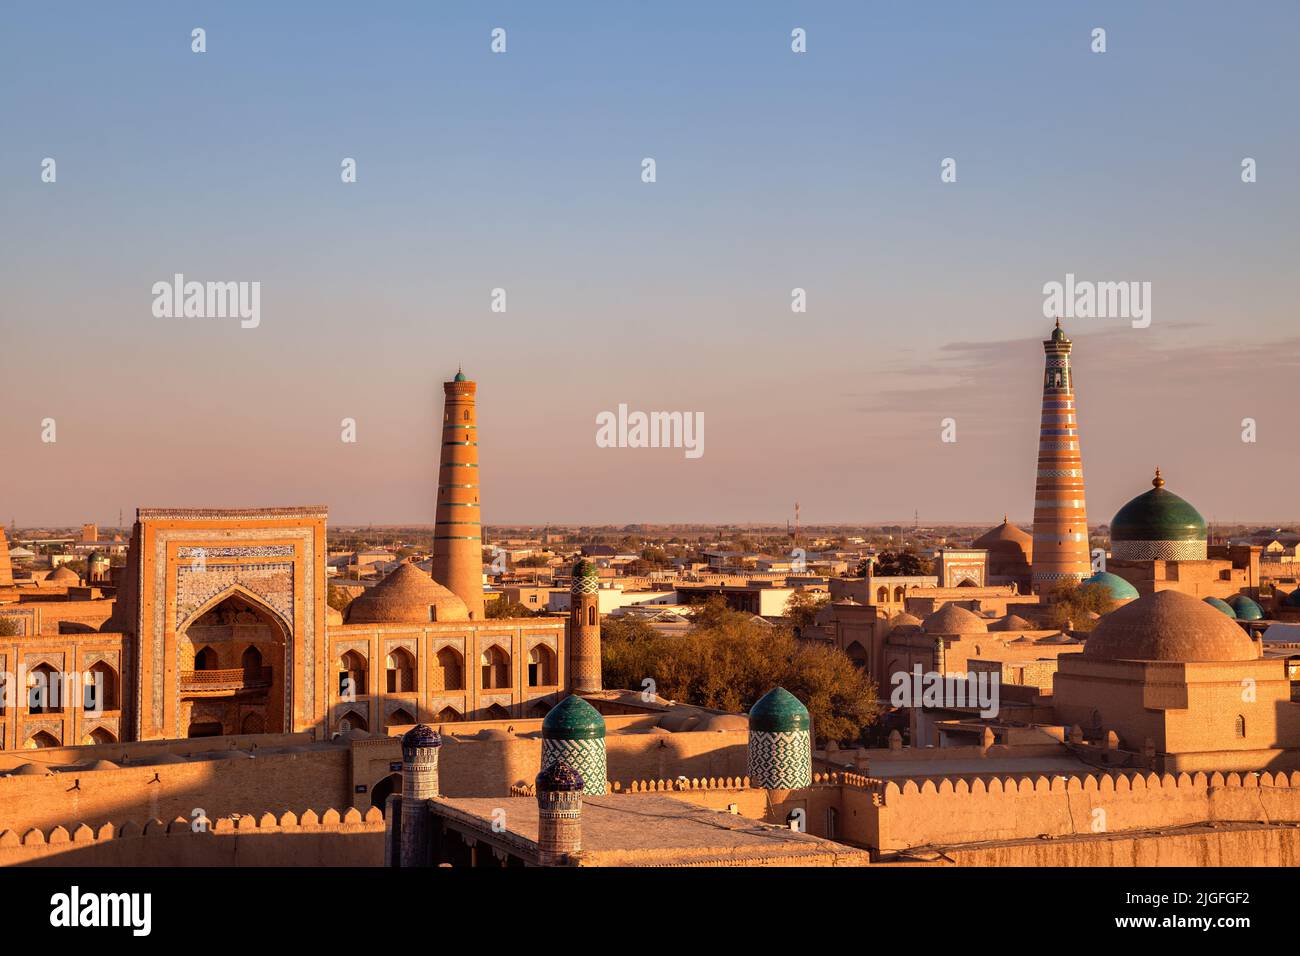 Sunset view from above on Itchan Kala fortress, Khiva old town, Uzbekistan Stock Photo